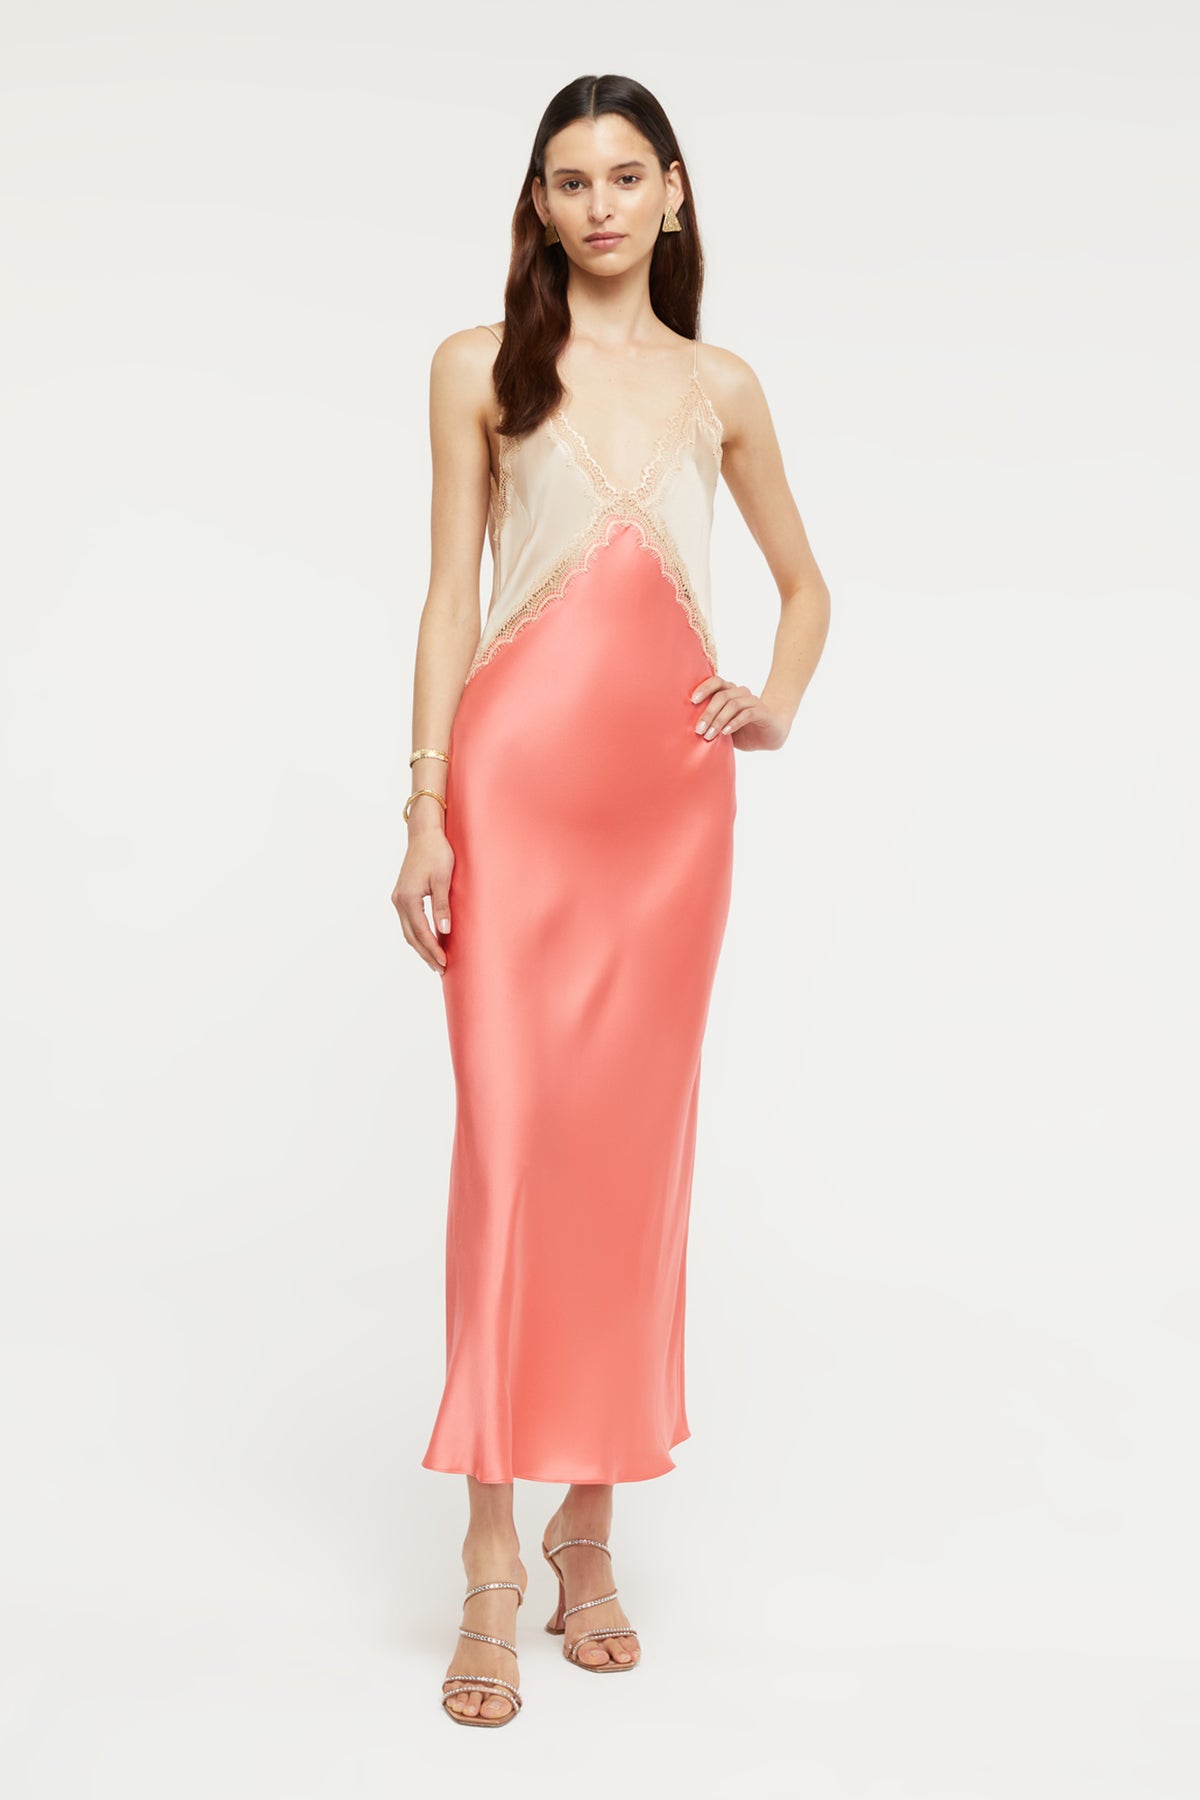 Sadie Dress in Almond Coral in 100% Silk from Ginia RTW